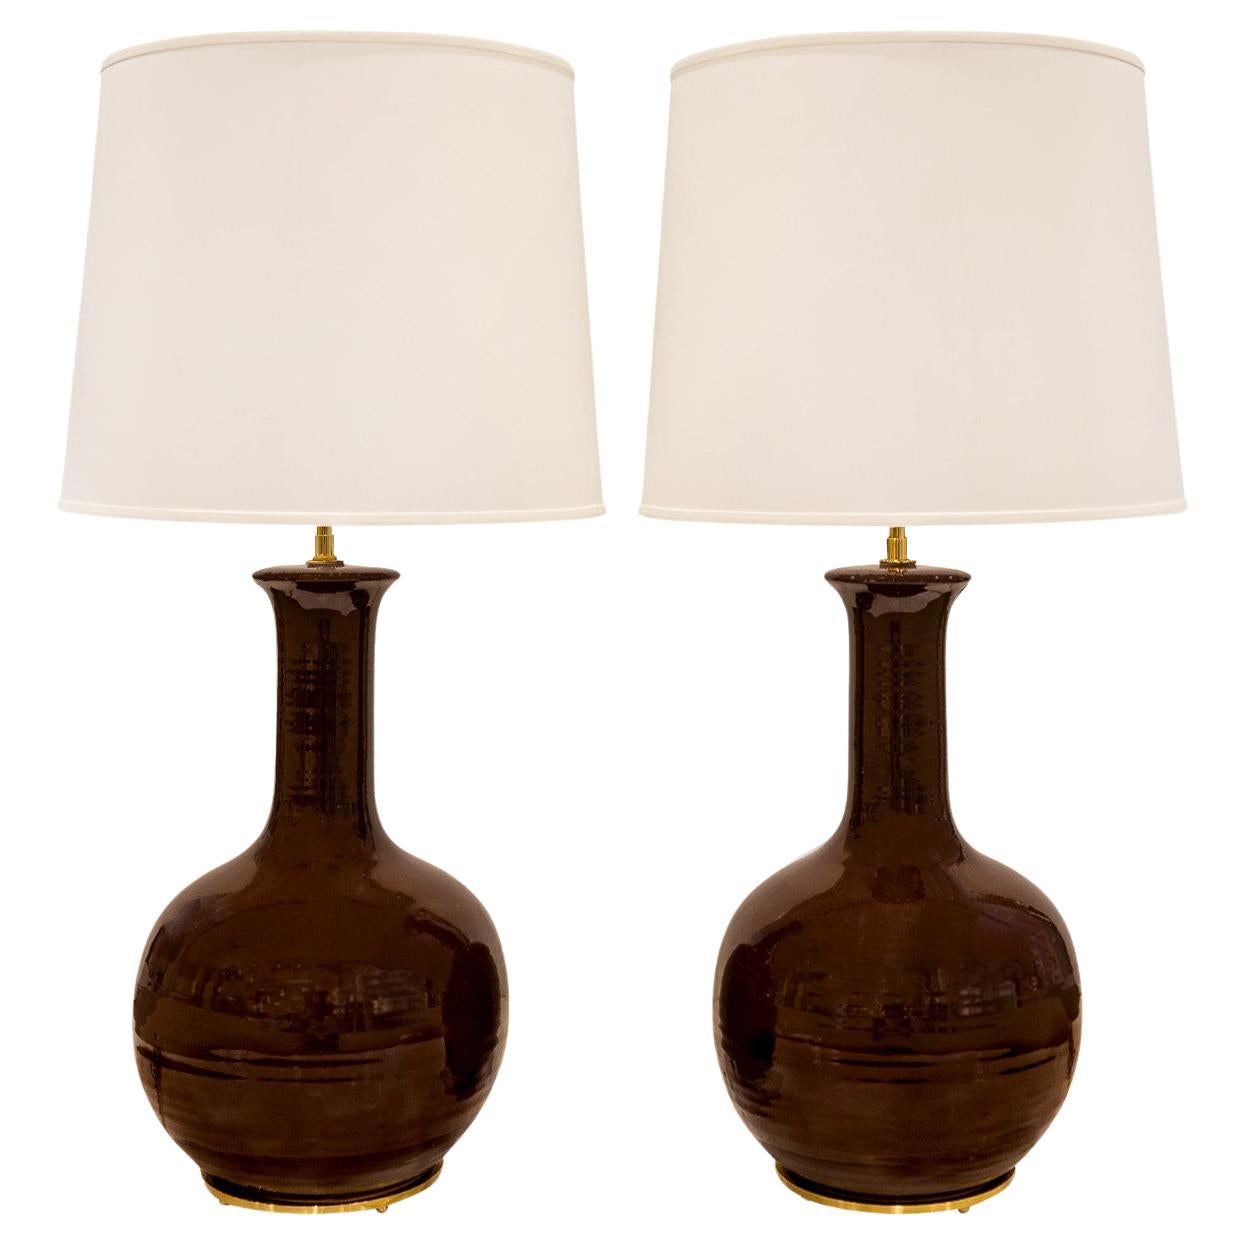 Pair of Exquisite Artisan Porcelain Lamps with Polished Brass Hardware 1960s For Sale